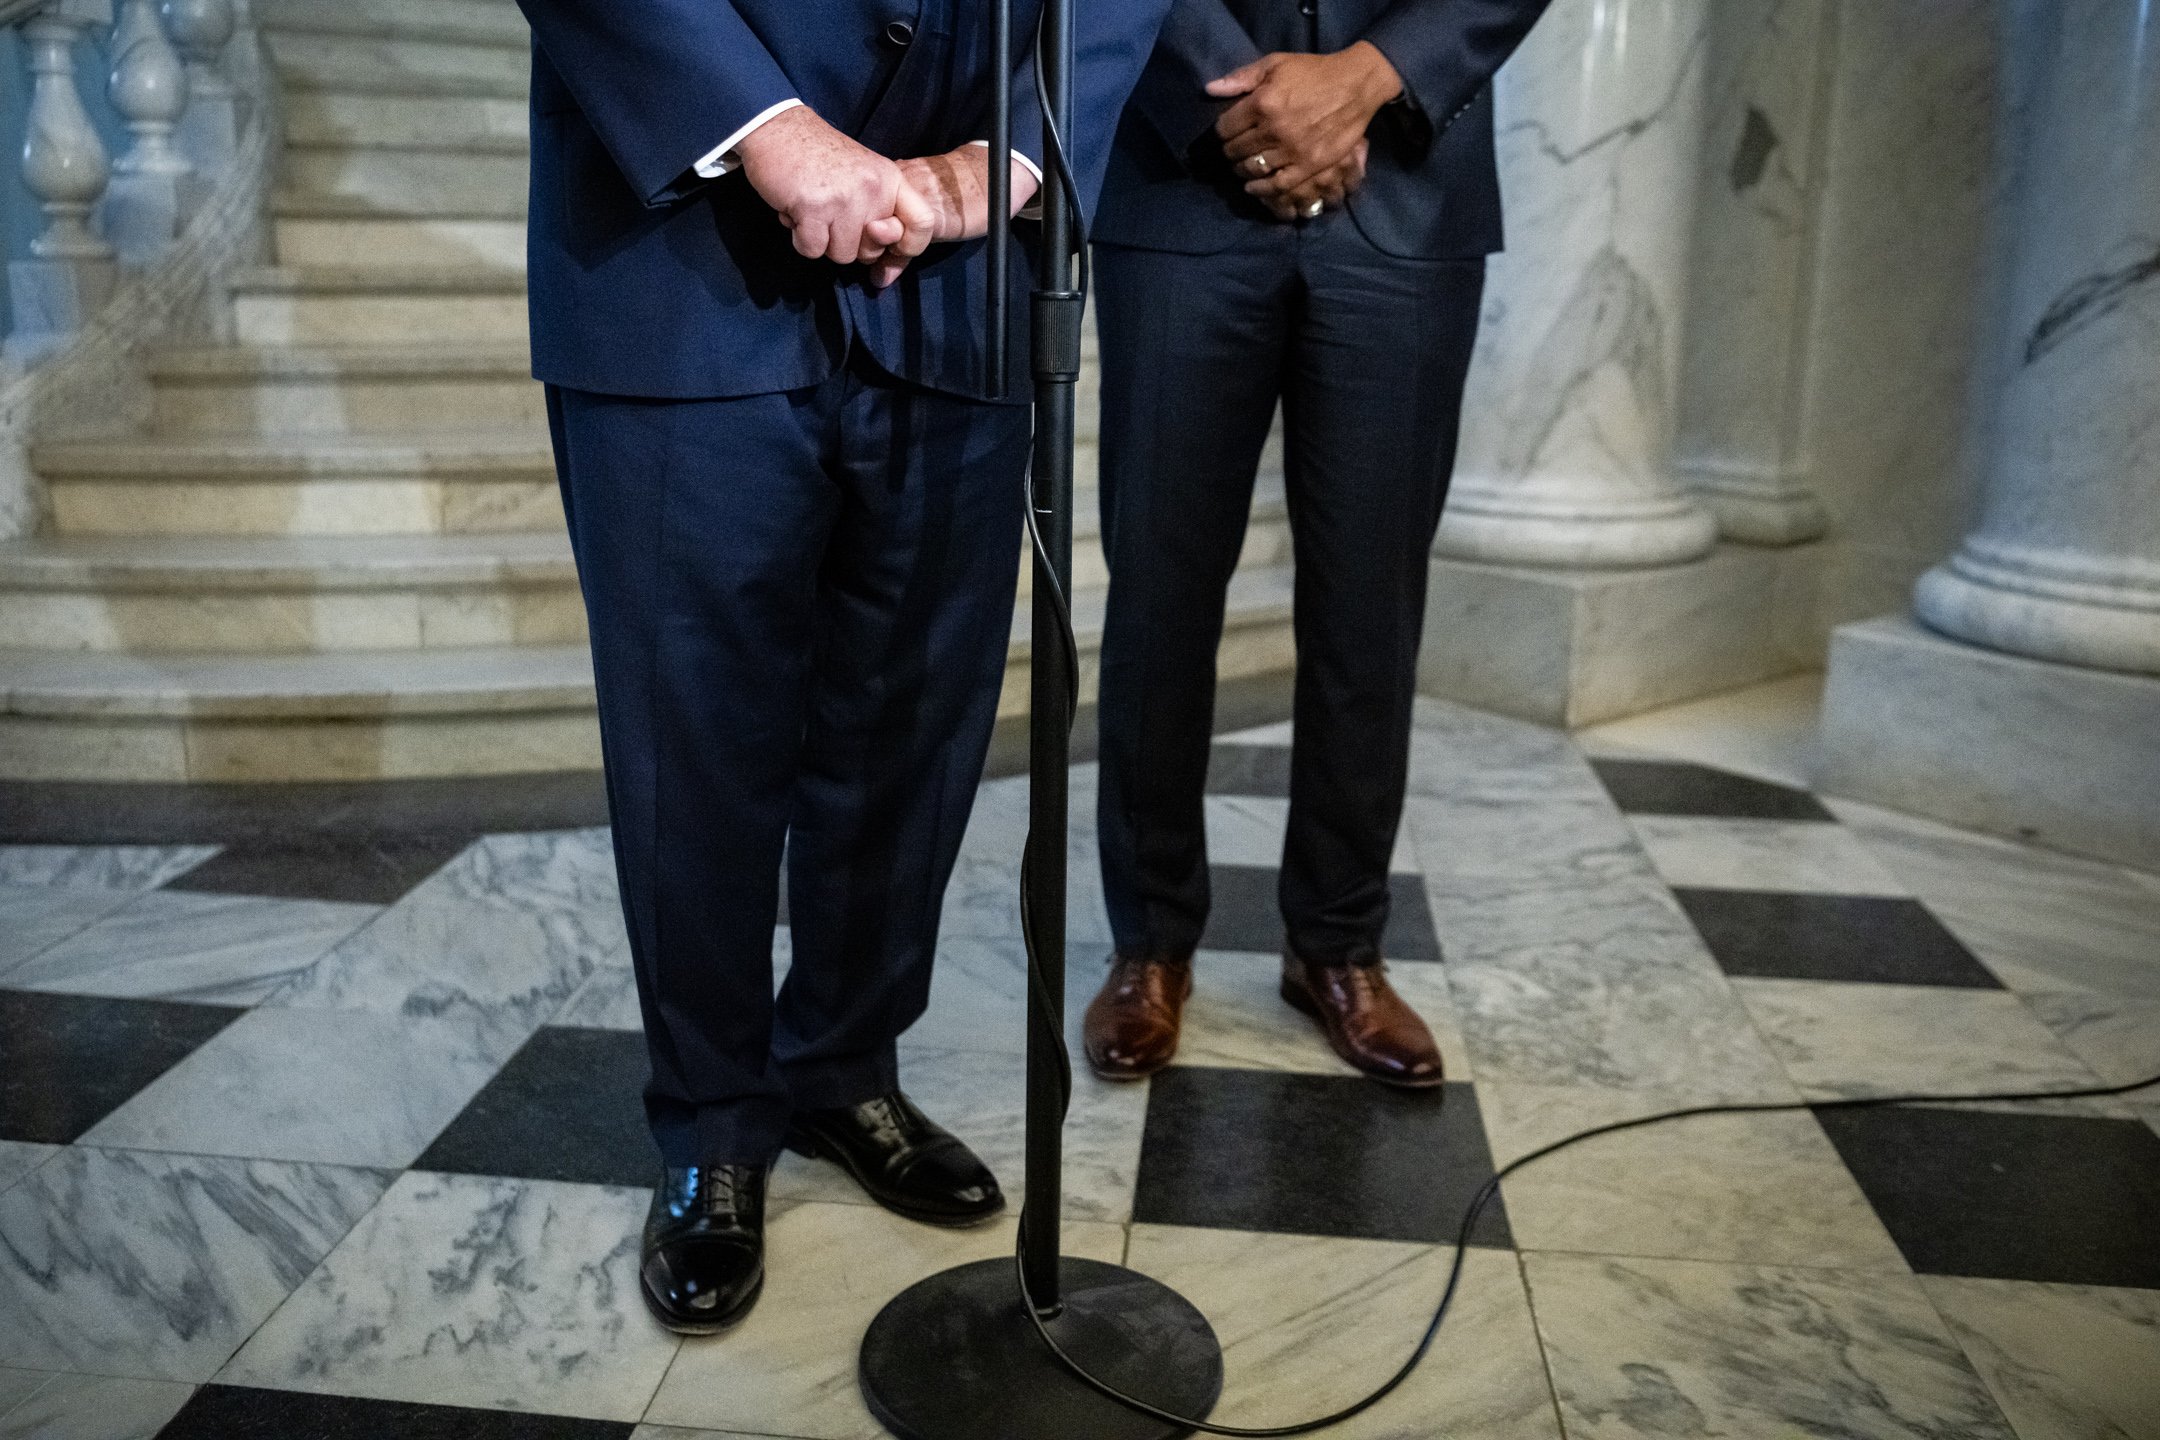  Maryland Governor Larry Hogan, left, speaks during a press conference with Governor-elect Wes Moore after meeting in the Governors office, at the Maryland State House, in Annapolis, Maryland, on November 10, 2022. (Photo by Graeme Sloan for The Wash